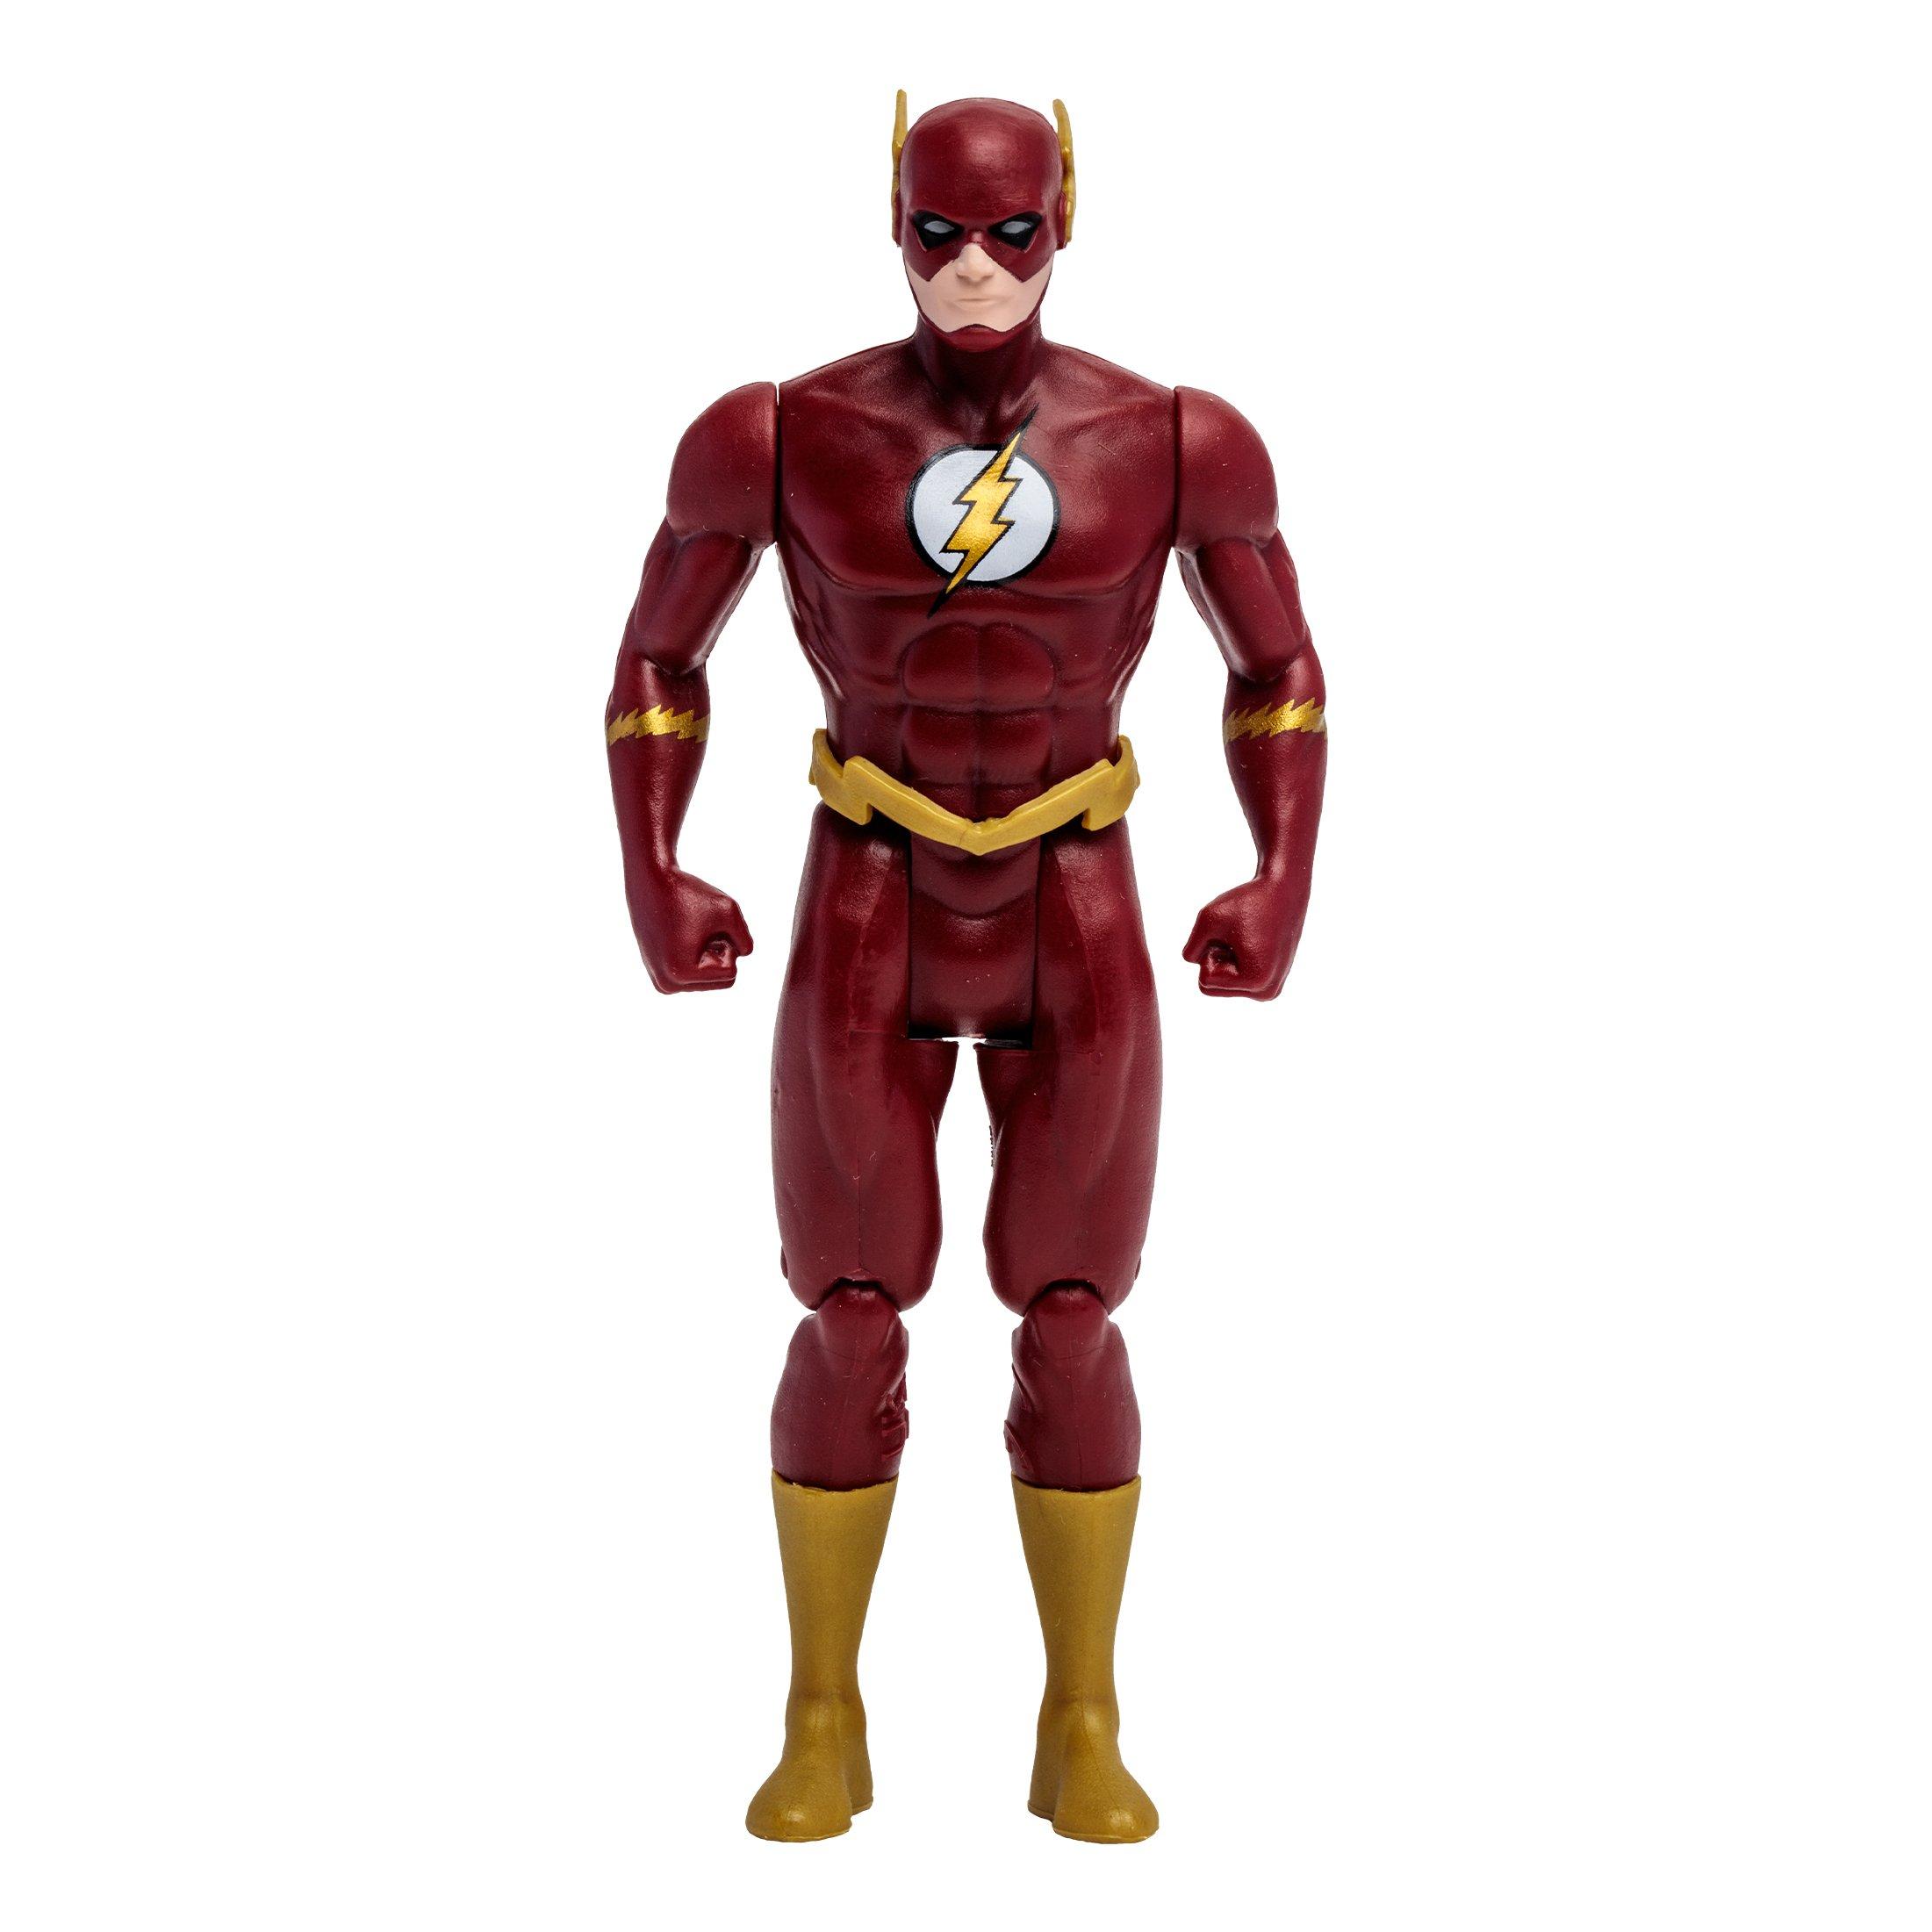 McFarlane Toys DC Direct Super Powers Flash 4.5-in Action Figure